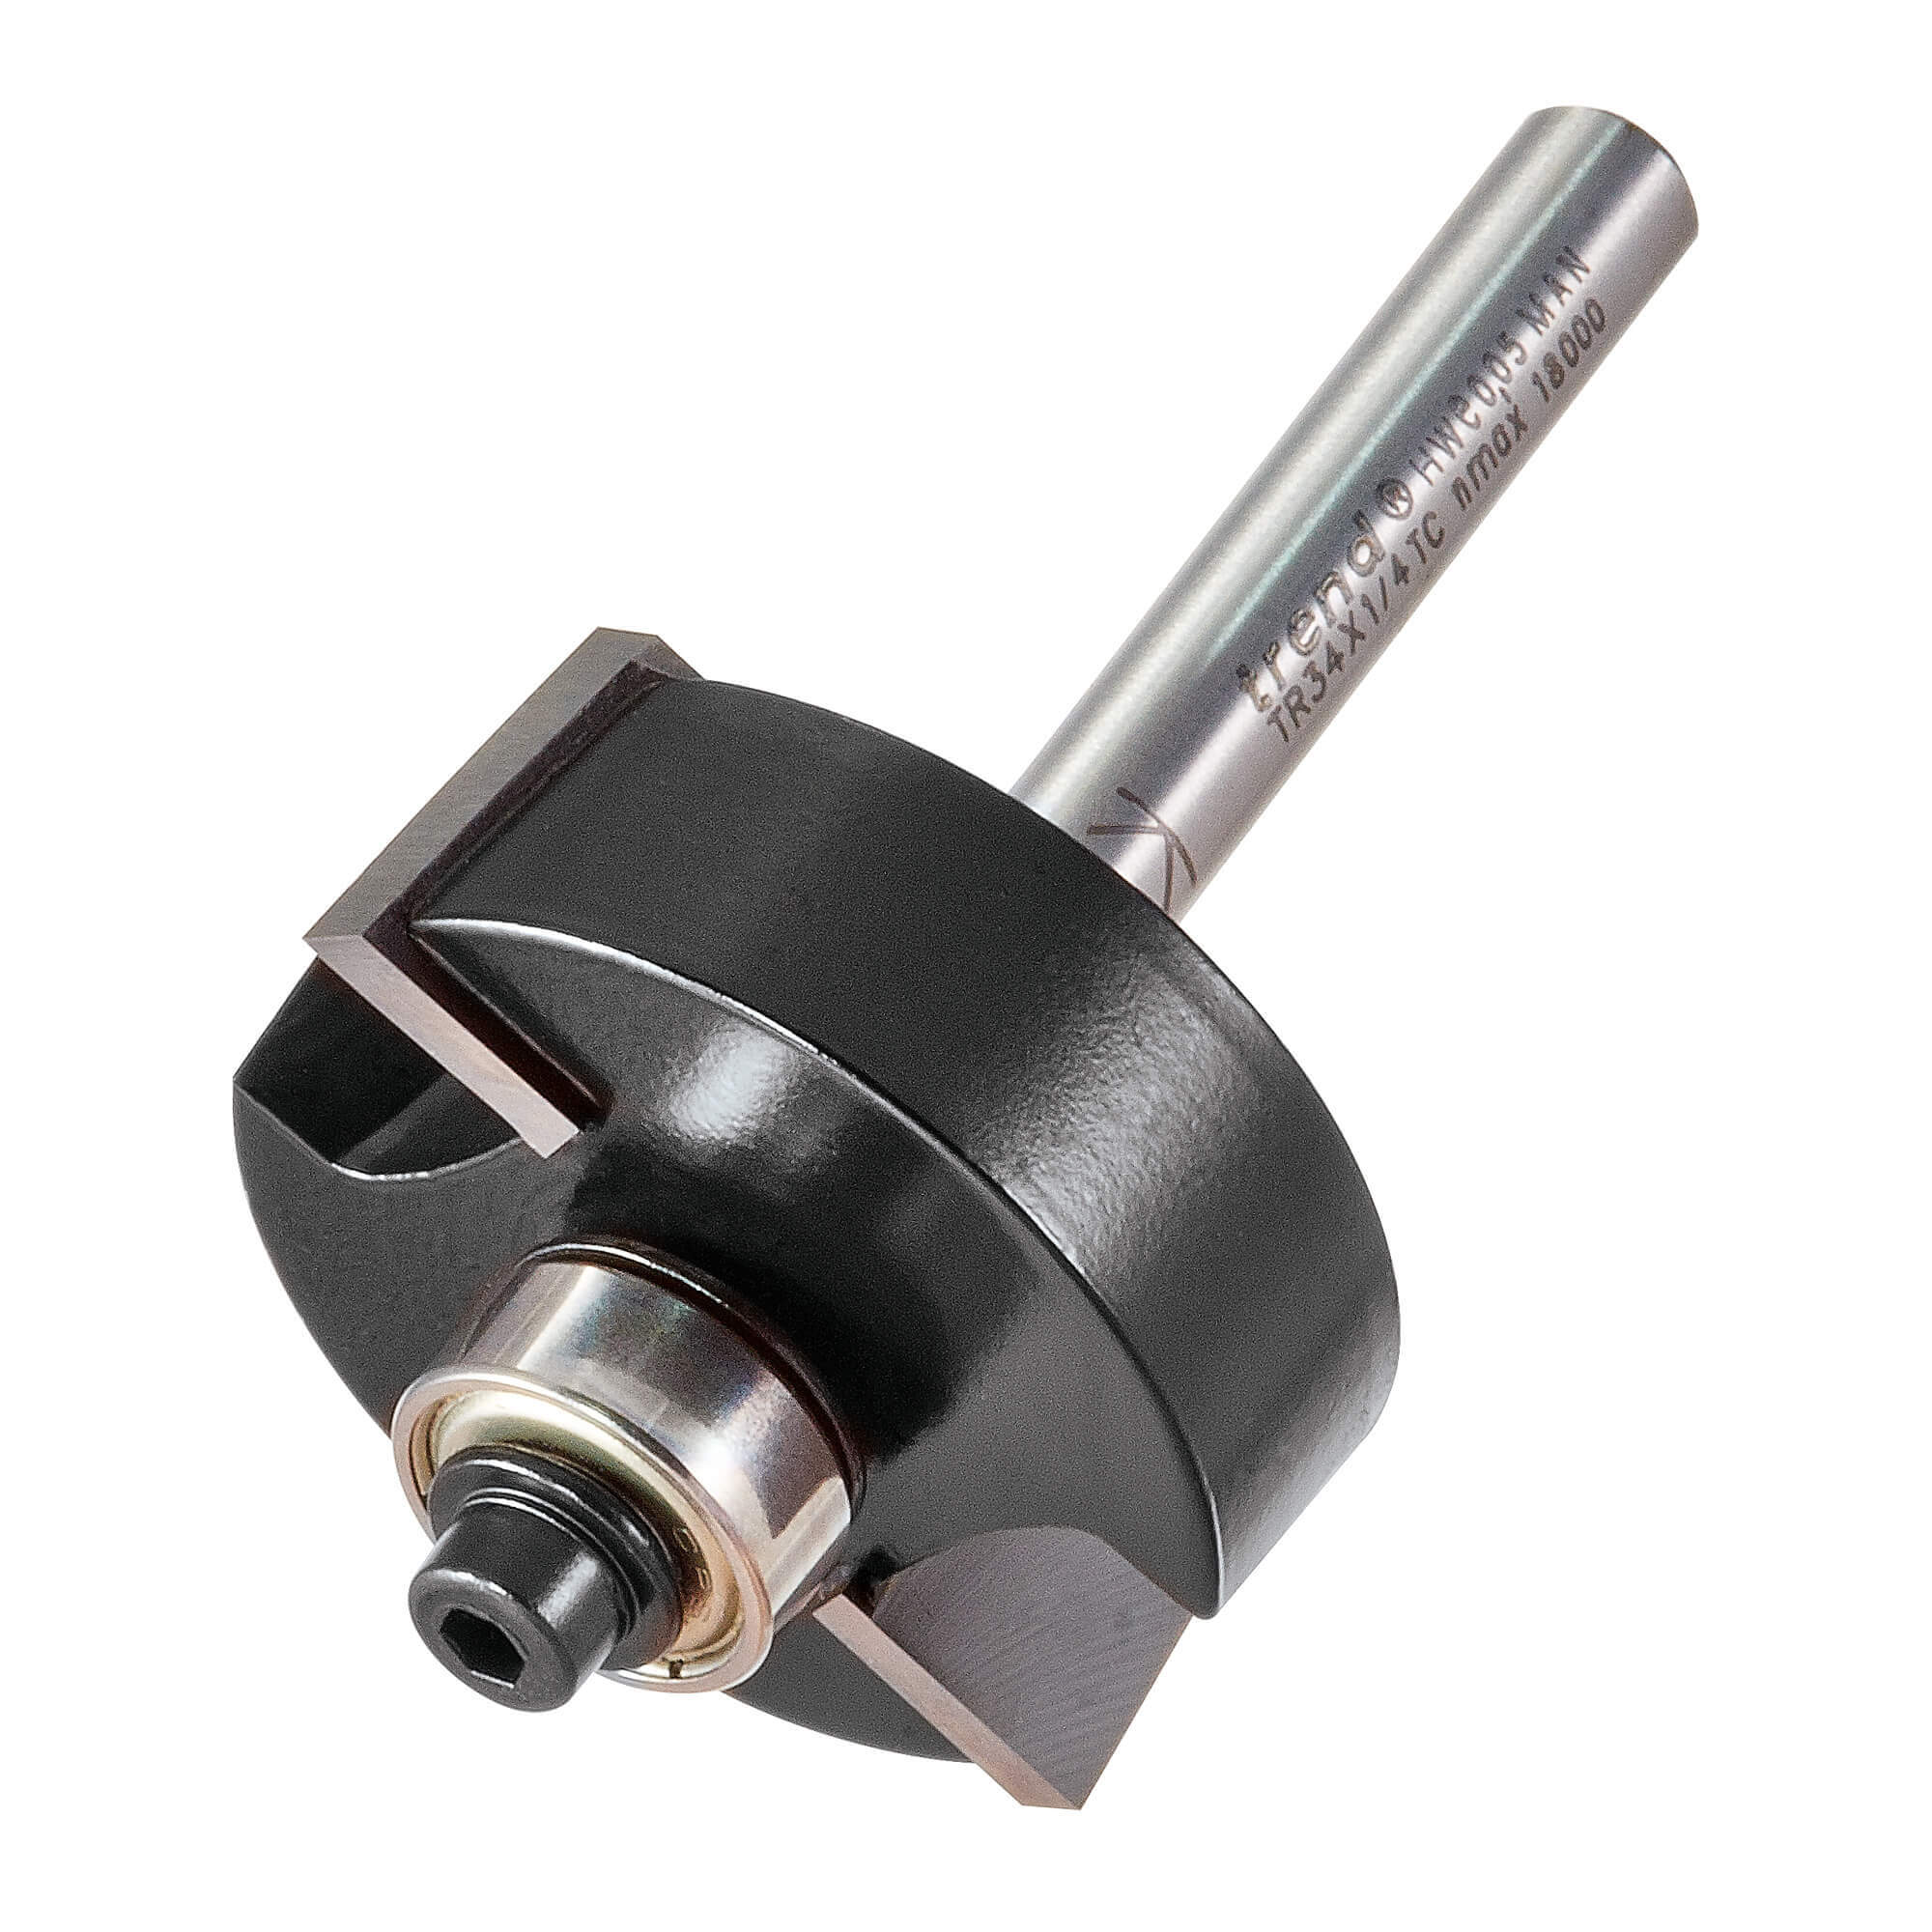 Image of Trend TRADE RANGE Bearing Guided Rebater Router Cutter 35mm 1/4"